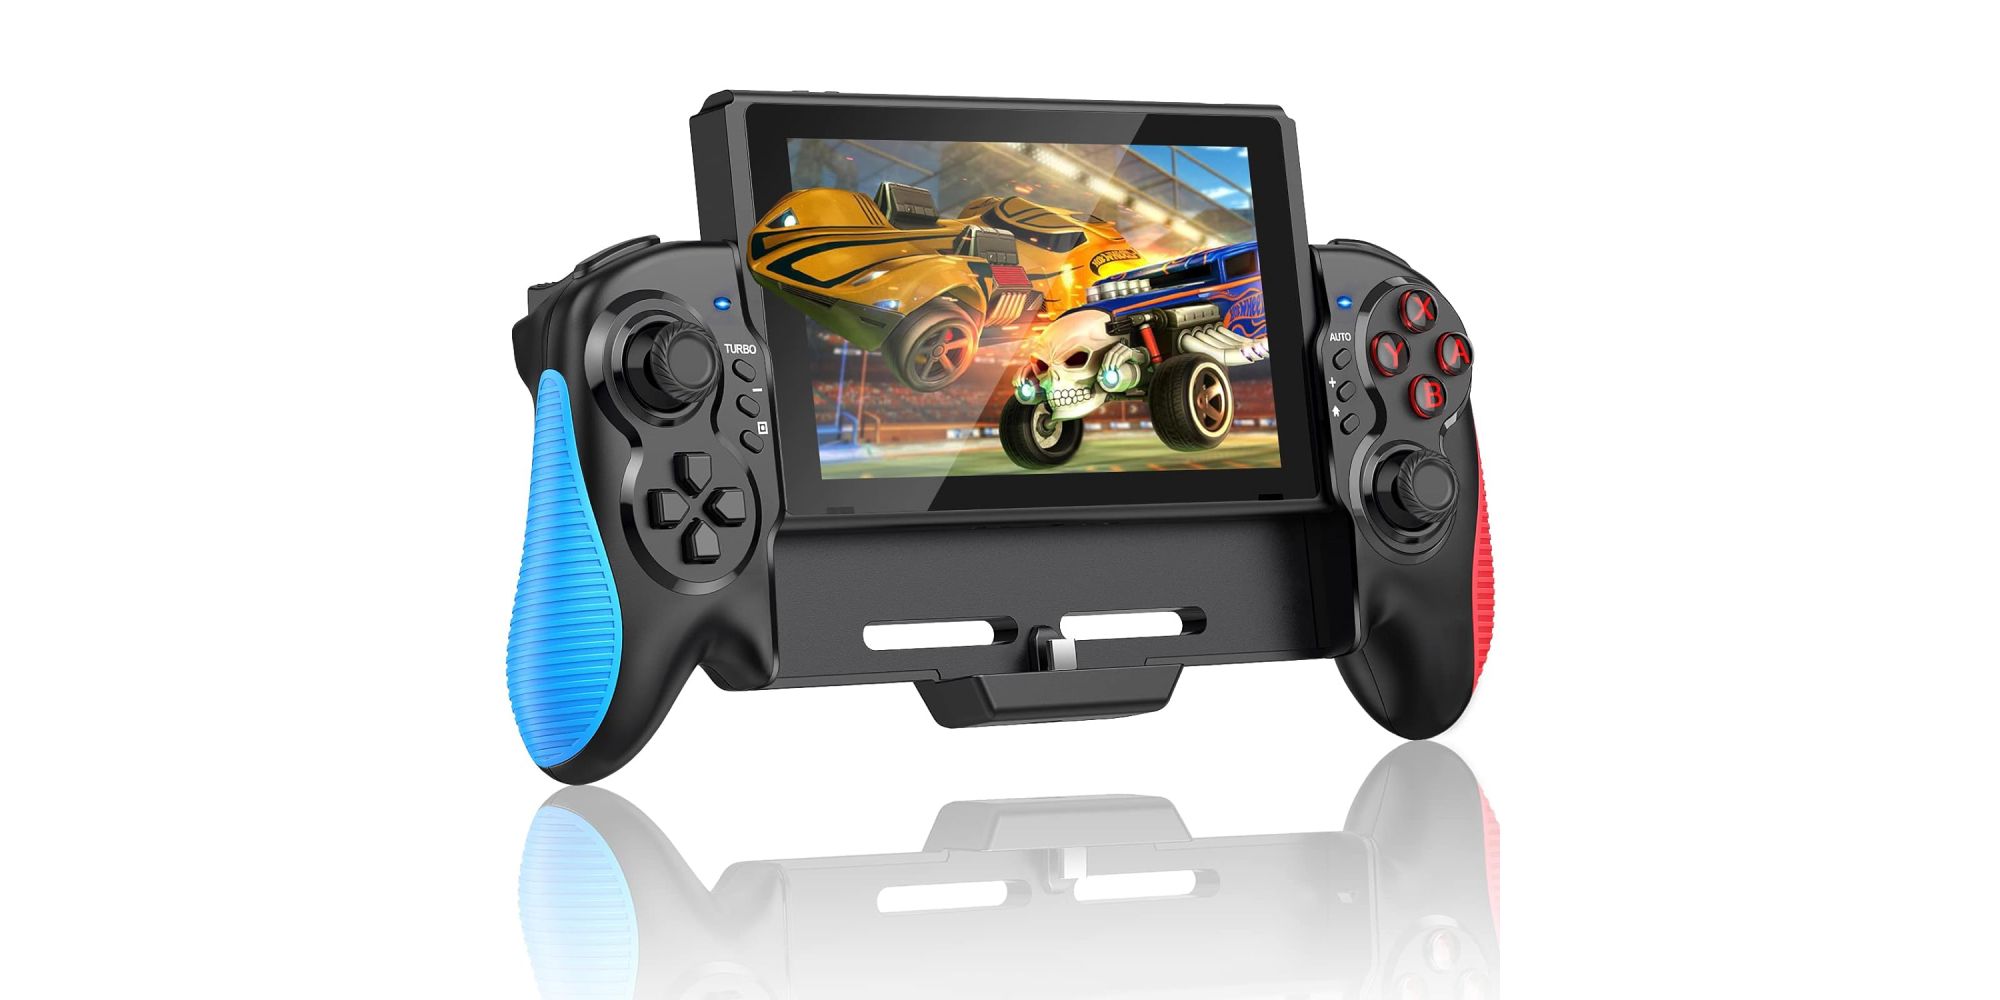 Gammeefy One-Piece Nintendo Switch Controller with Rocket League playing on the screen